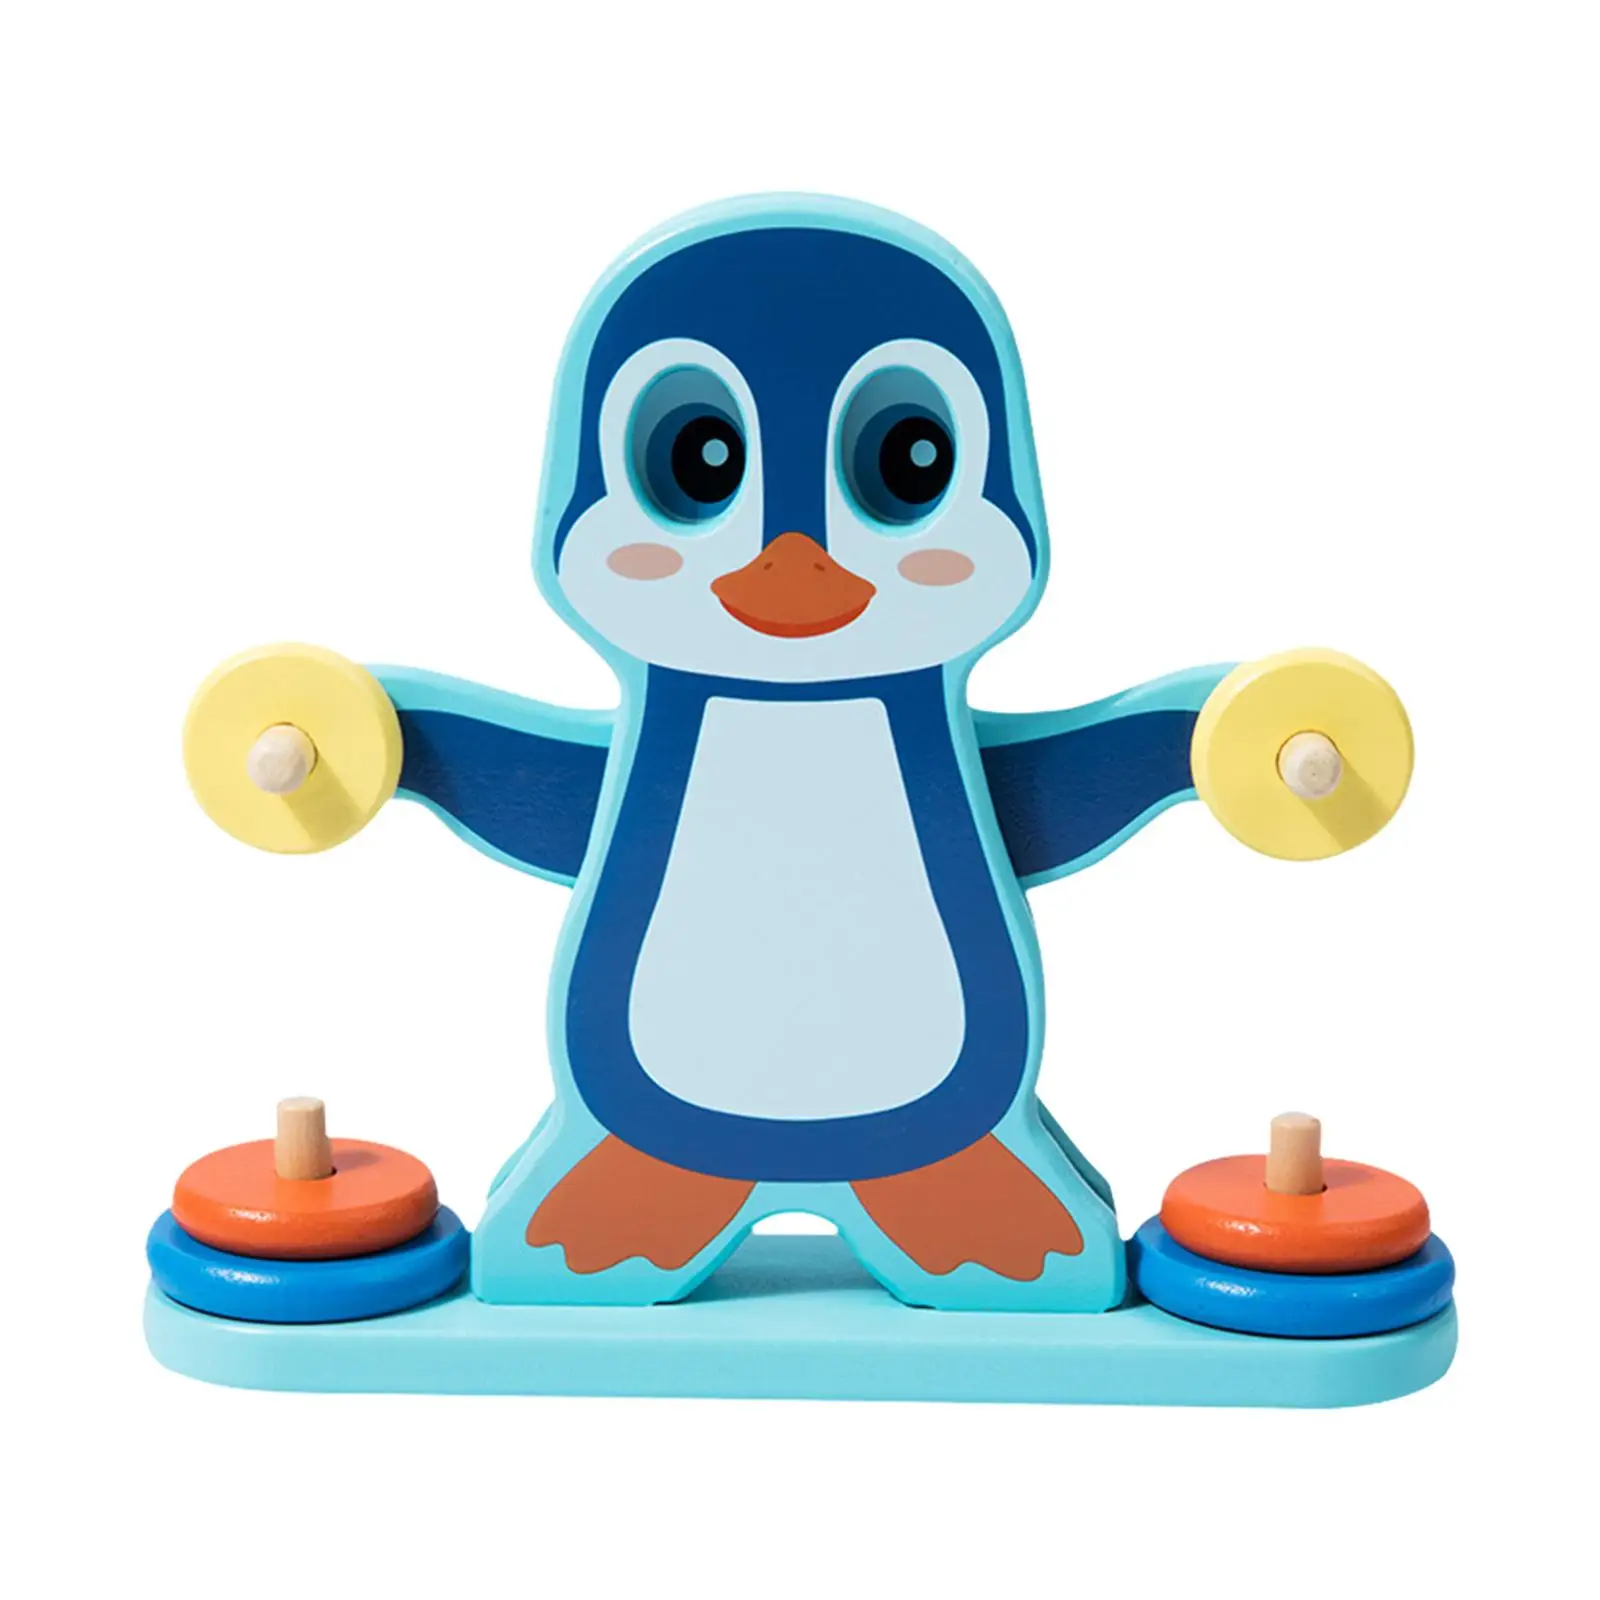 Penguin Balance Counting Game Number Recognition Learning Activities for Boys Girls Kindergarten Birthday Gift Children Math Toy